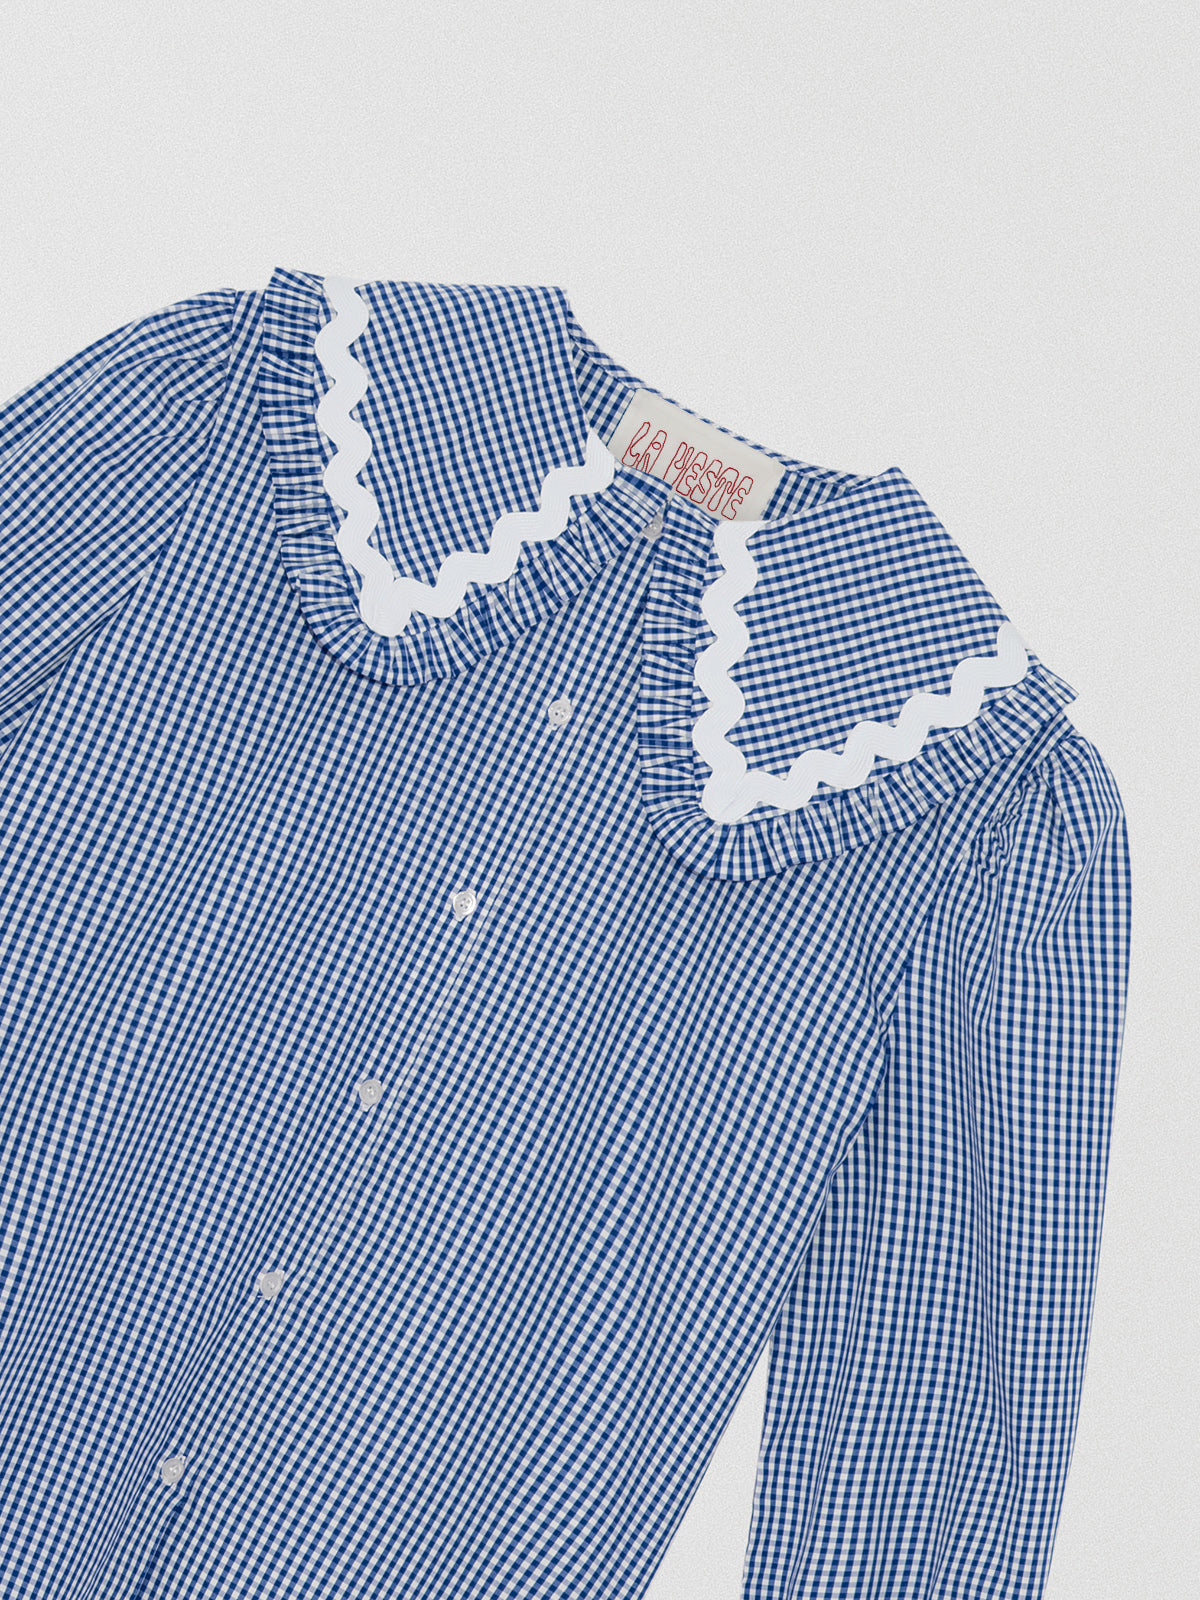 Navy and white vichy check shirt made of cotton with white trim detail on the collar